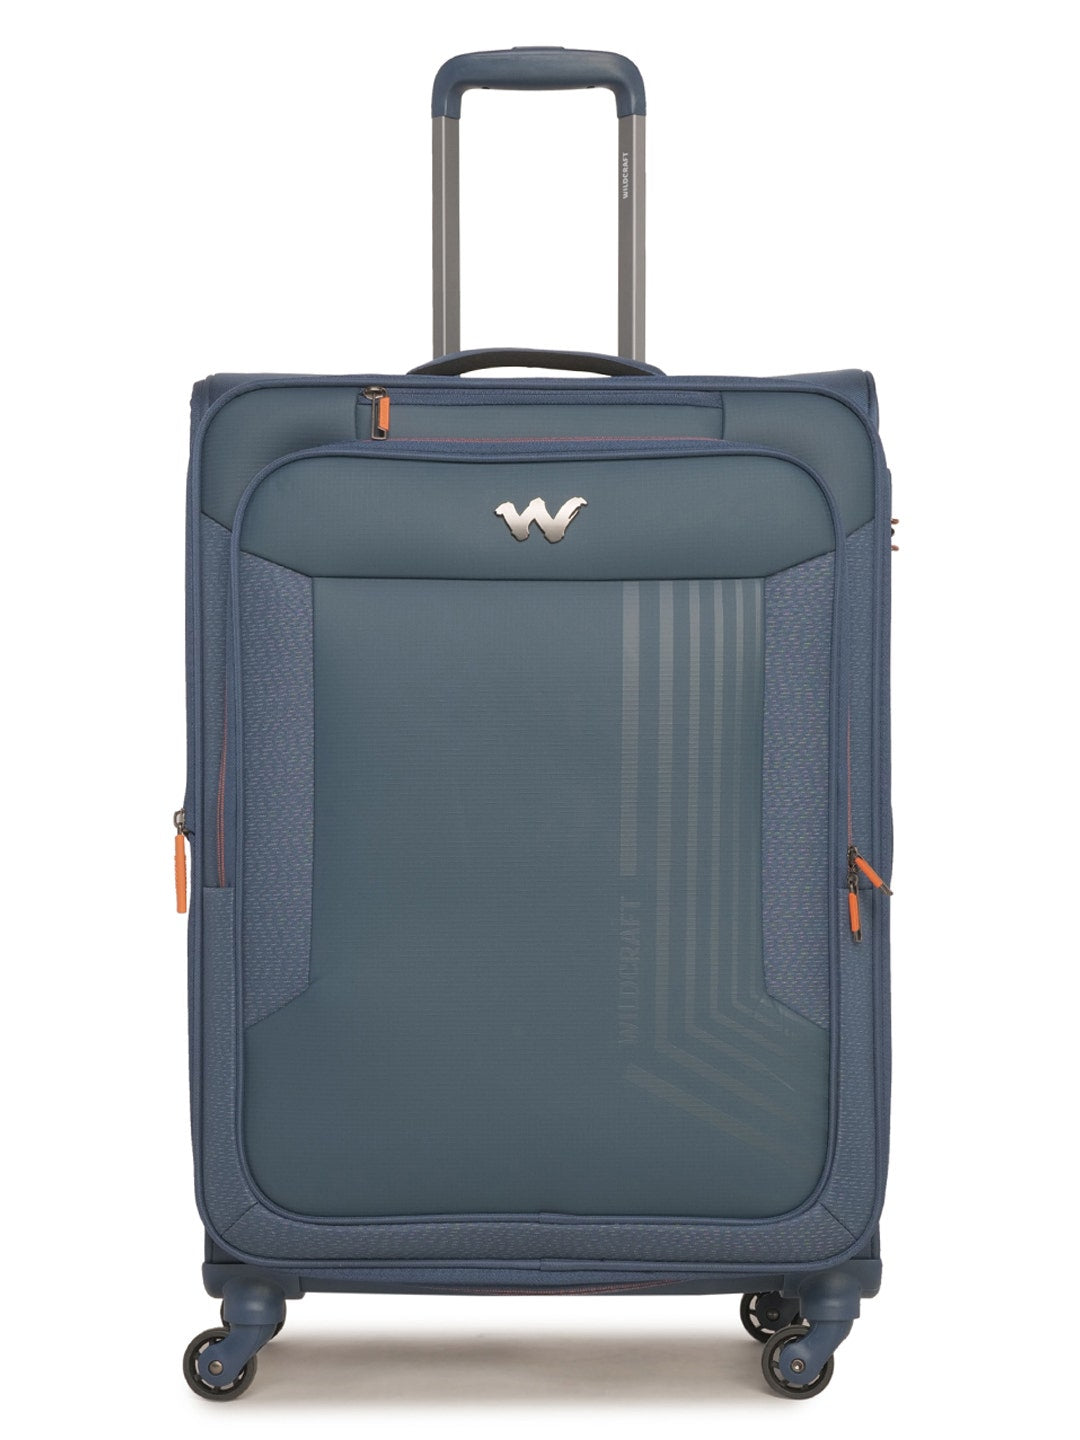 Wildcraft Voyager Blue Trolley Bag For Travelling Size 505 X 35 X 80cm